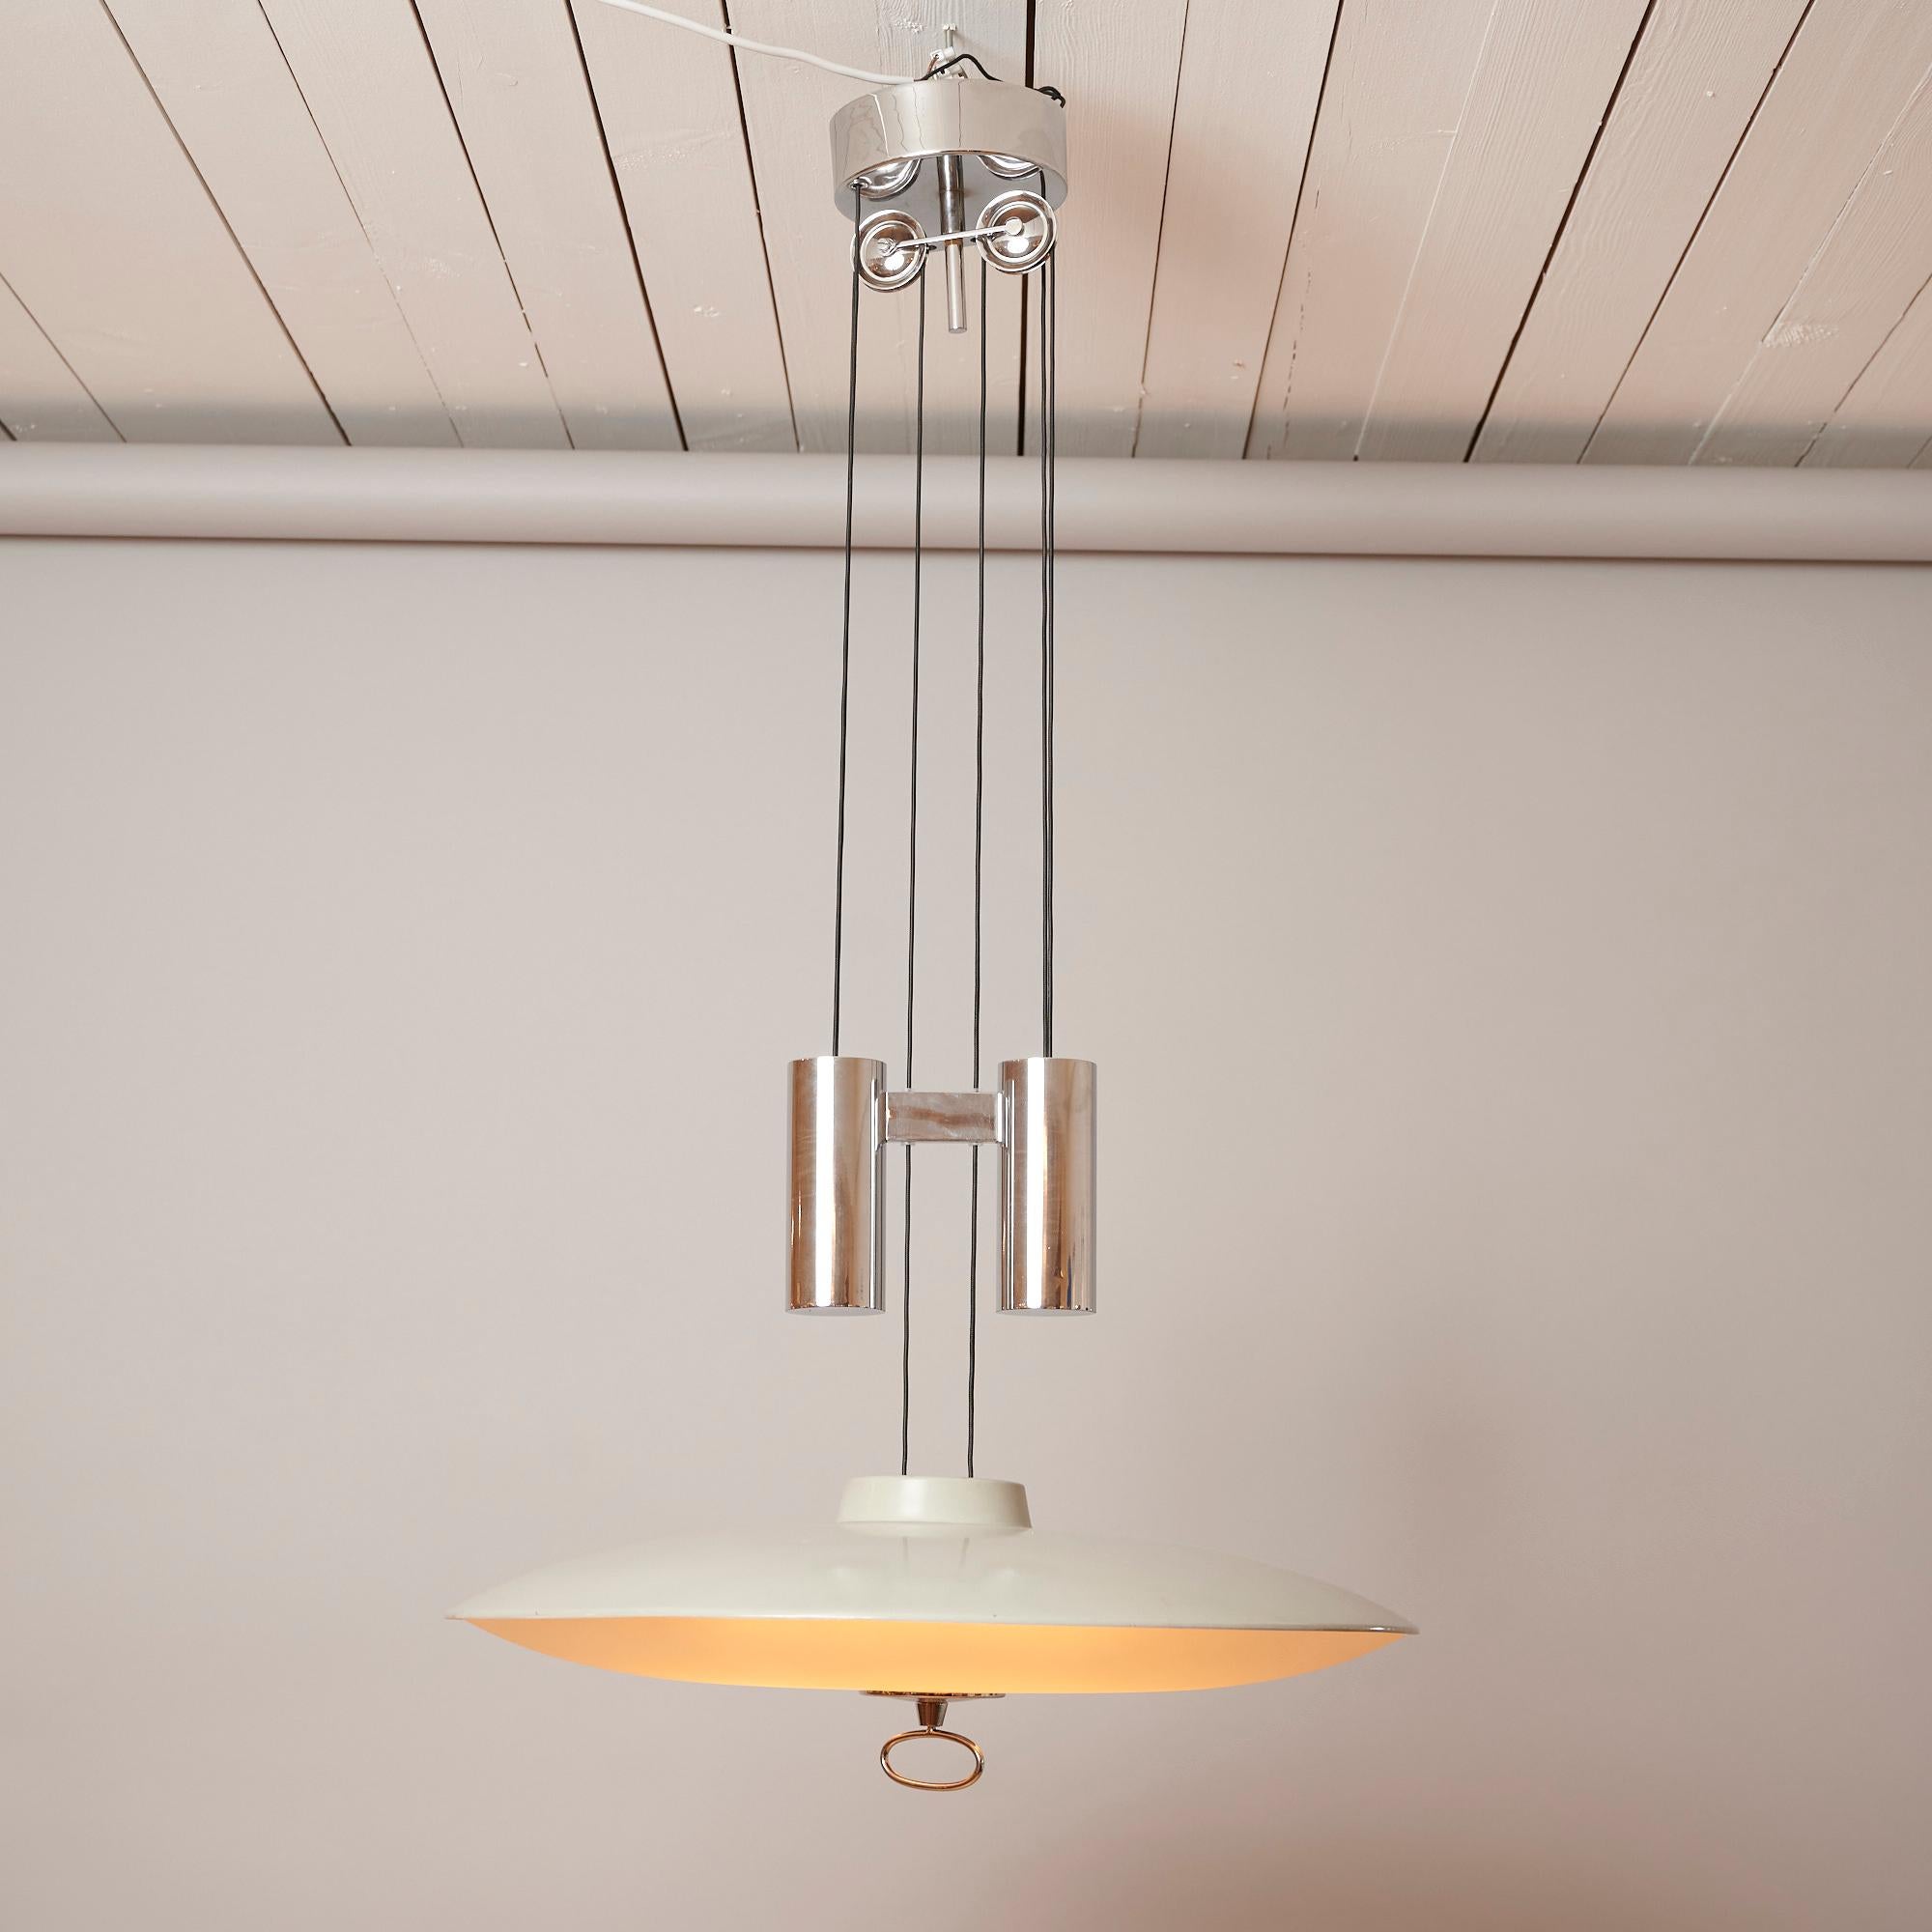 Rare counterbalance light by Max Ingrand for Fontana Arte. Model 1953

An elegant pendant light by Max Ingrand in full working order. 

Original grey paint.